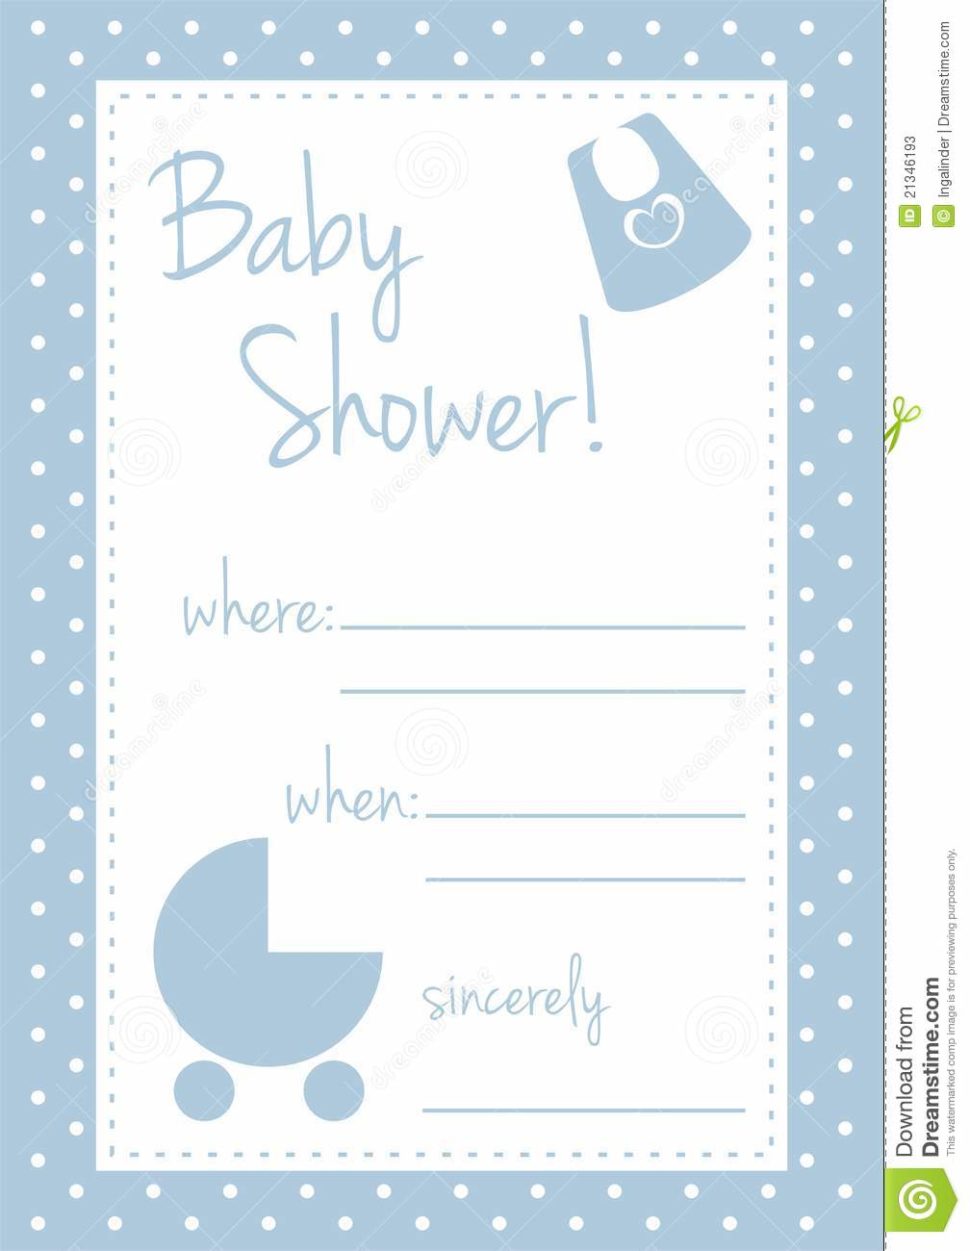 Medium Size of Baby Shower:graceful Baby Shower Cards Image Designs Baby Shower Cards As Well As Blue Punch For Baby Shower With Baby Shower Thank You Plus Baby Shower Quilt Together With Baby Shower Venue Ideas